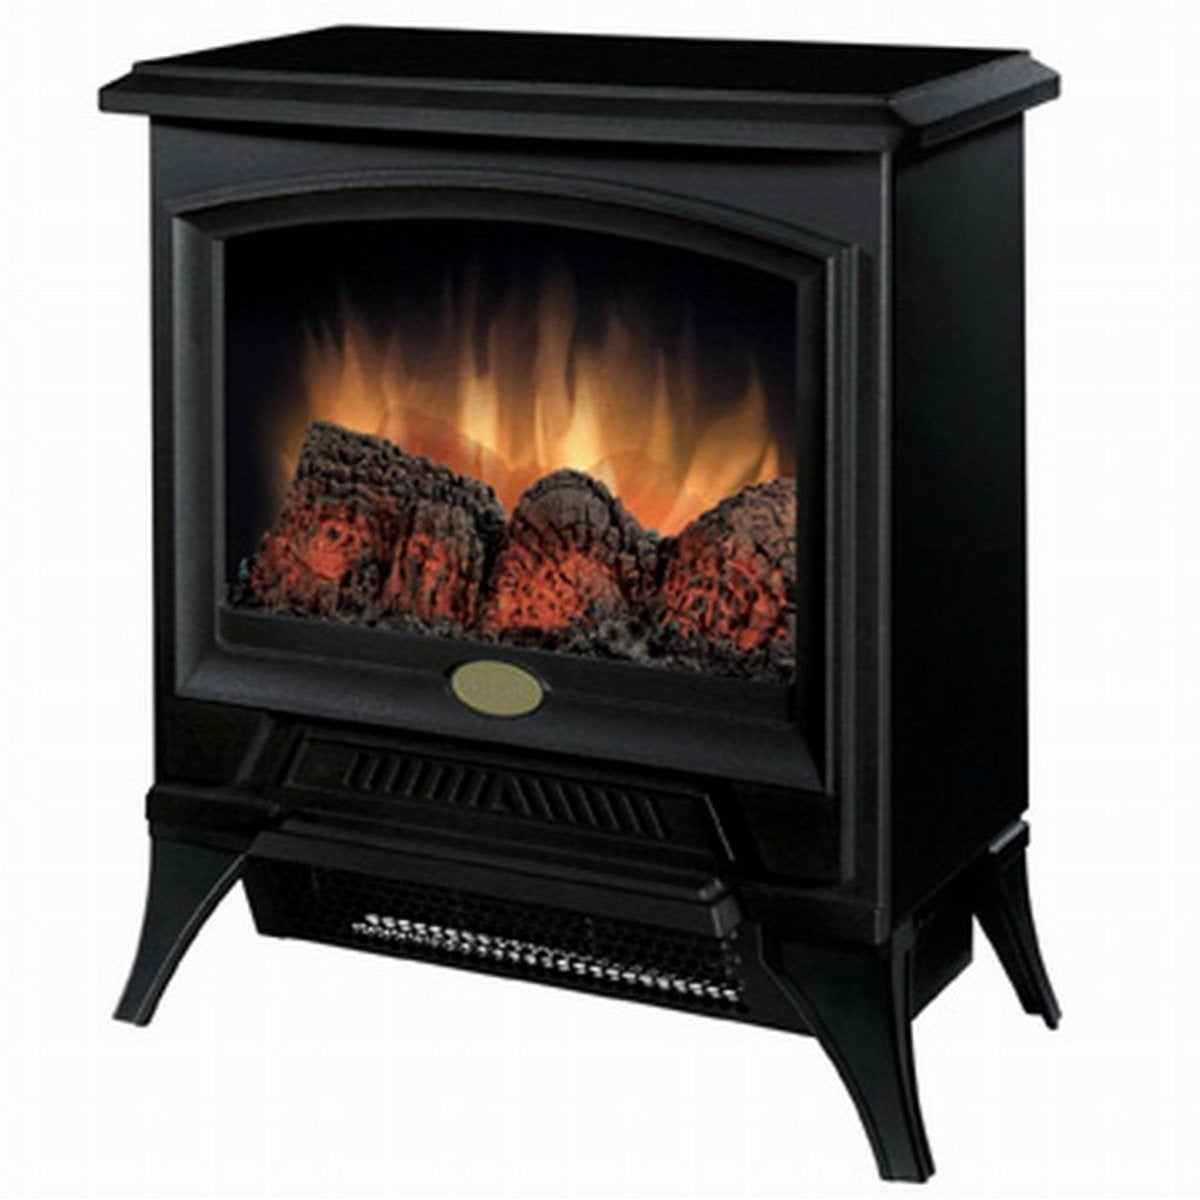 FastFurnishings Compact Stove Style Electric Fireplace Space Heater in Black